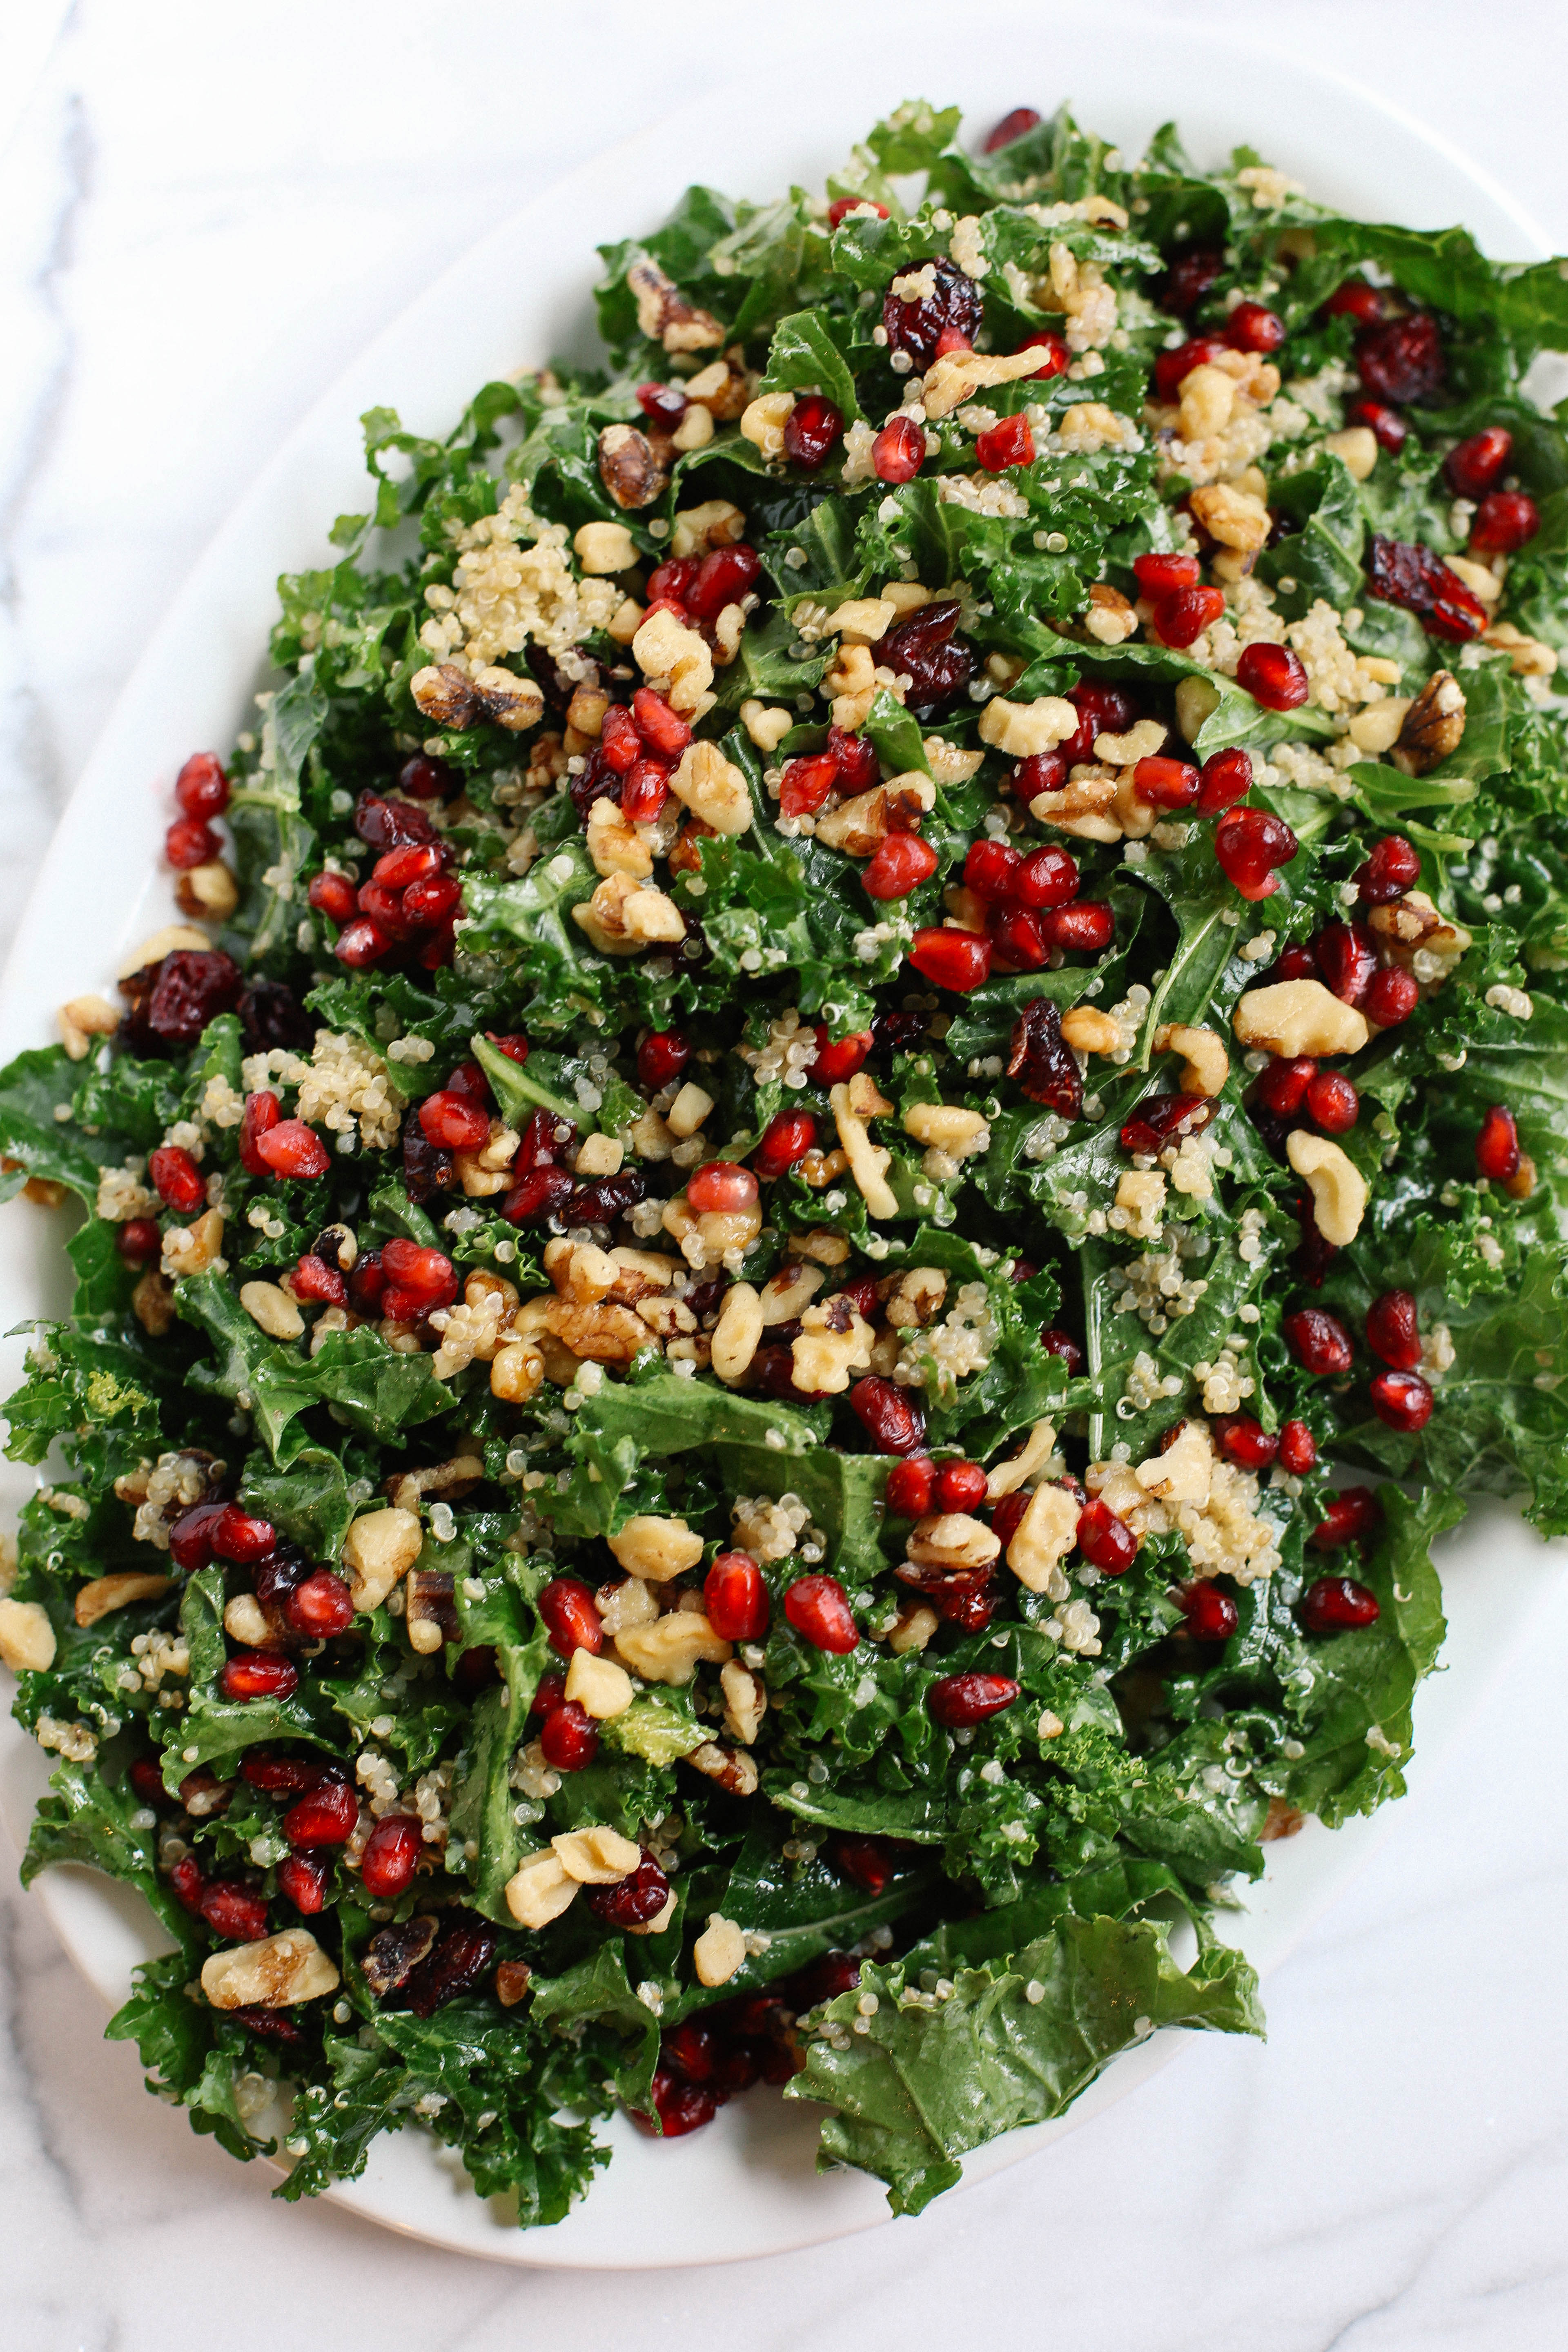 This Winter Kale and Quinoa Salad makes the perfect healthy holiday side dish that is sweet, crunchy and super easy to make!